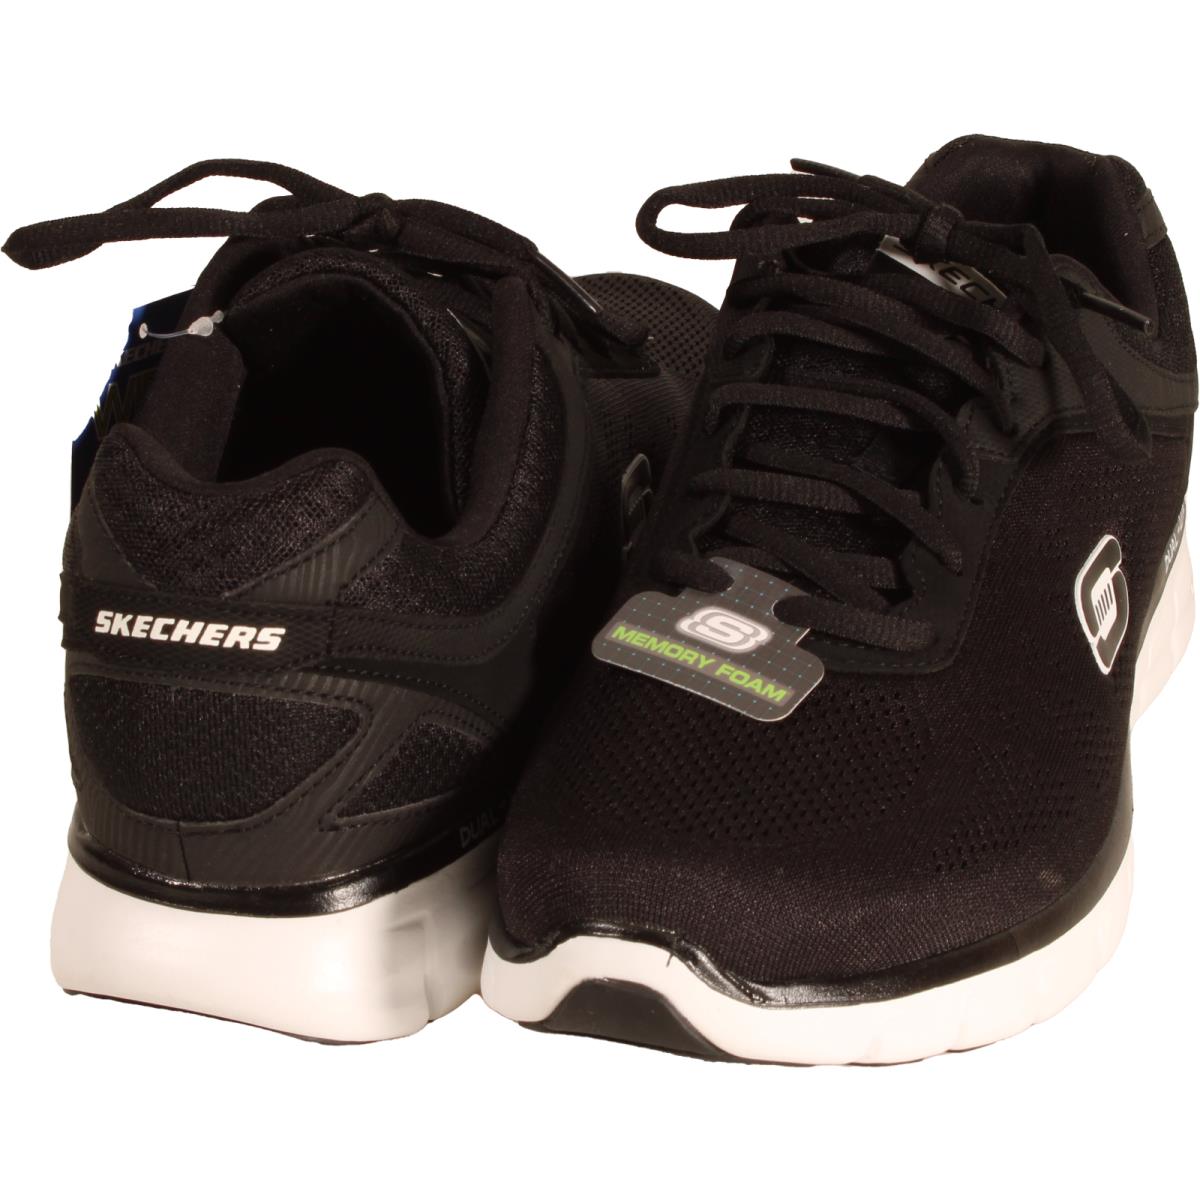 Skechers Skech Knit Dual Lite Mens Mid Top Running Shoes Black US Size 10 Wide